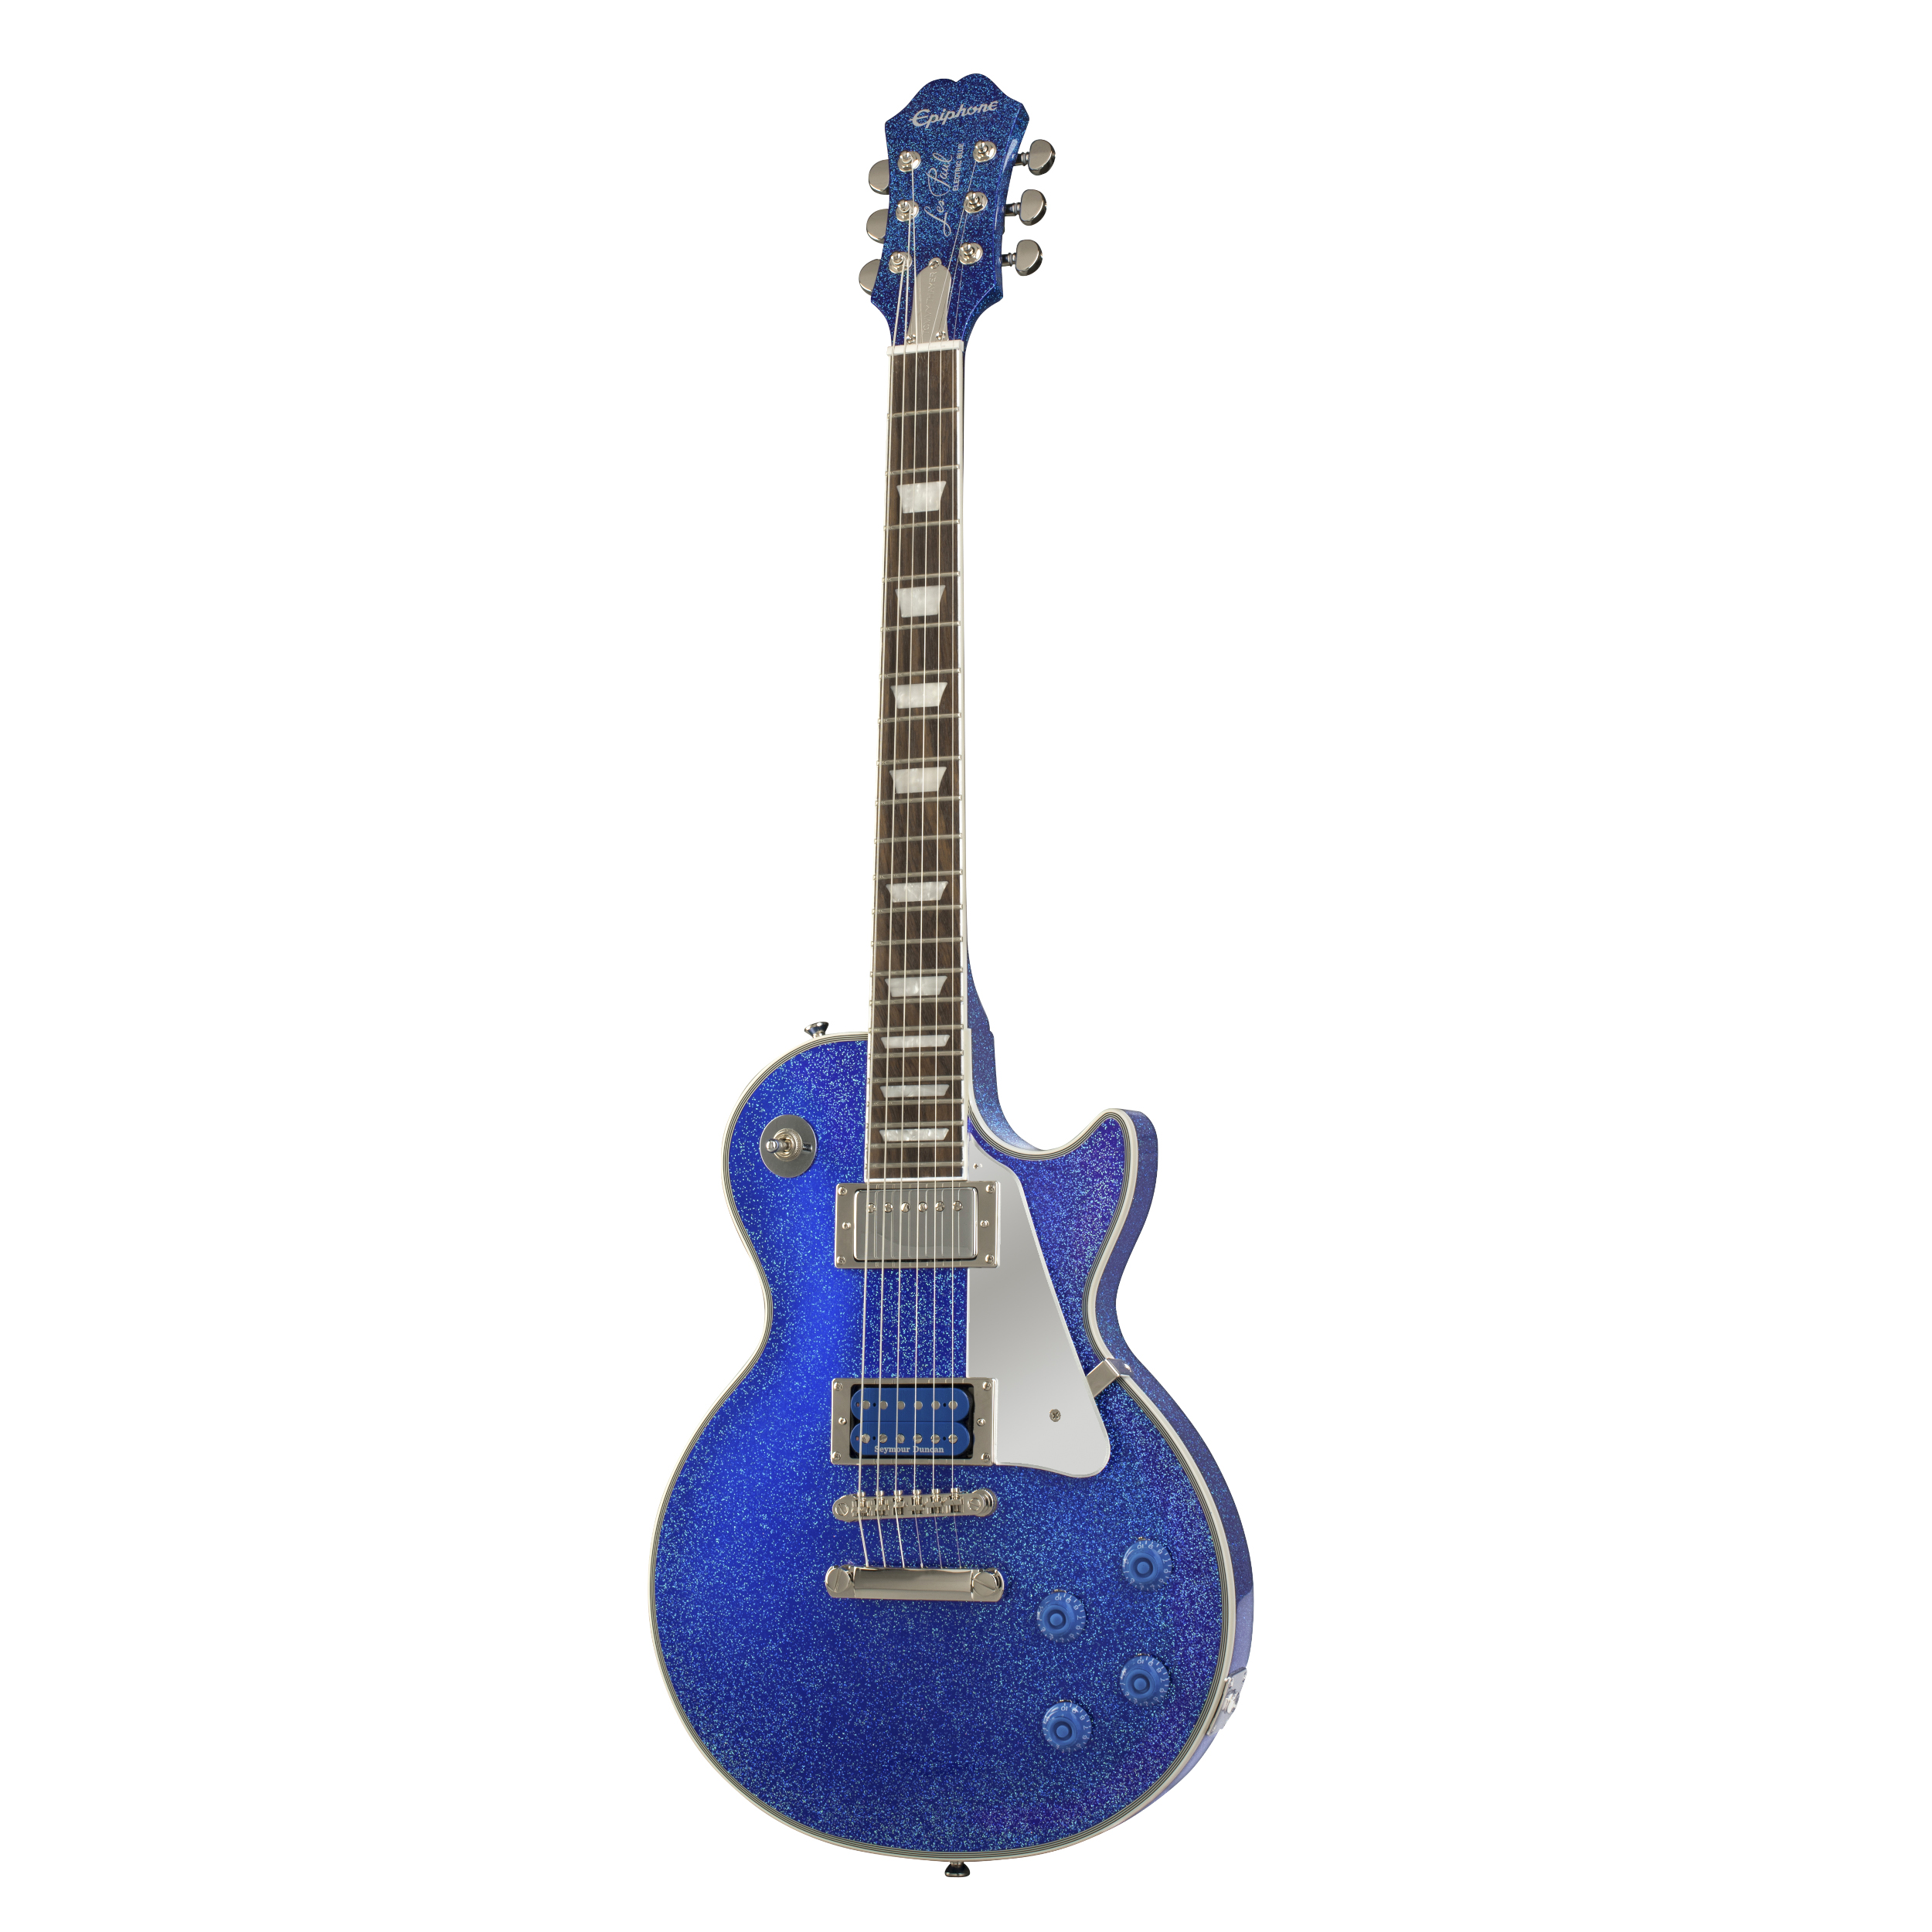 Epiphone Tommy Thayer "Electric Blue" Les Paul - Electric Blue Guitar